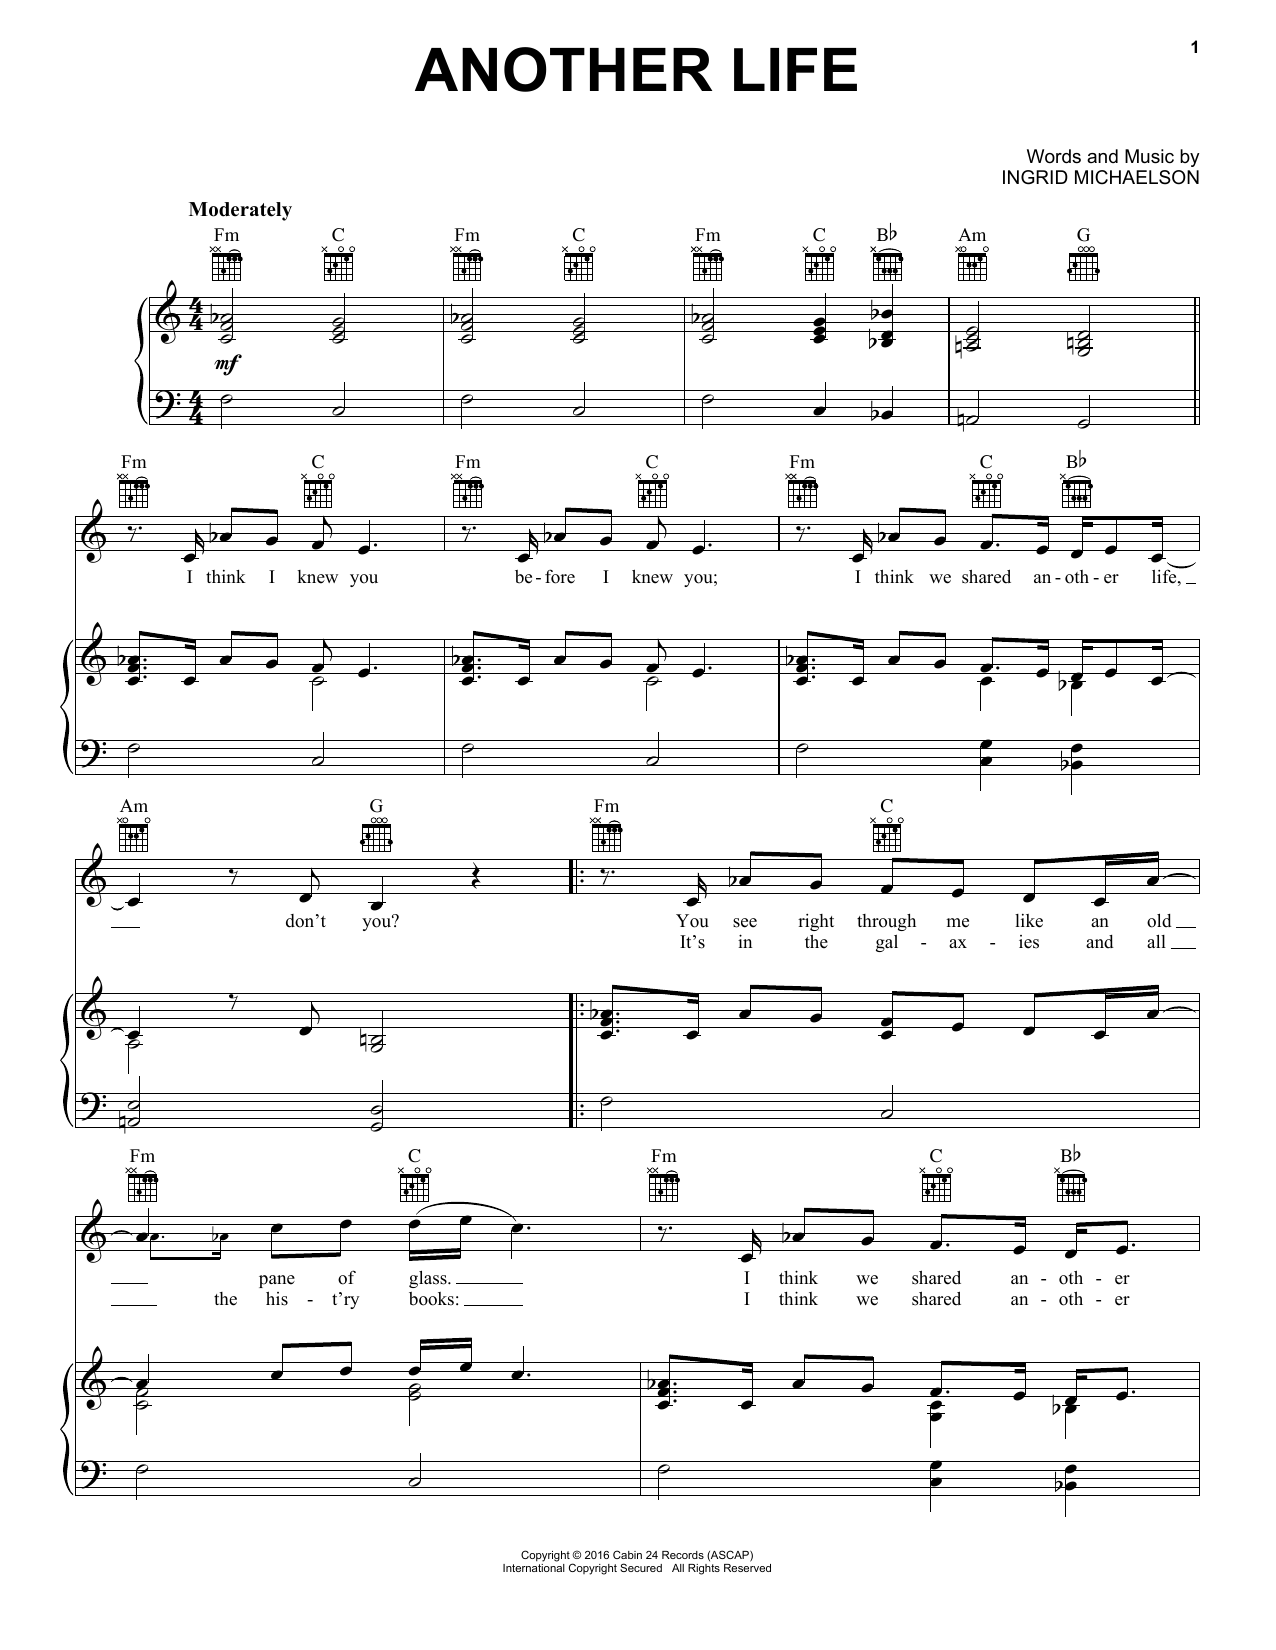 Download Ingrid Michaelson Another Life Sheet Music